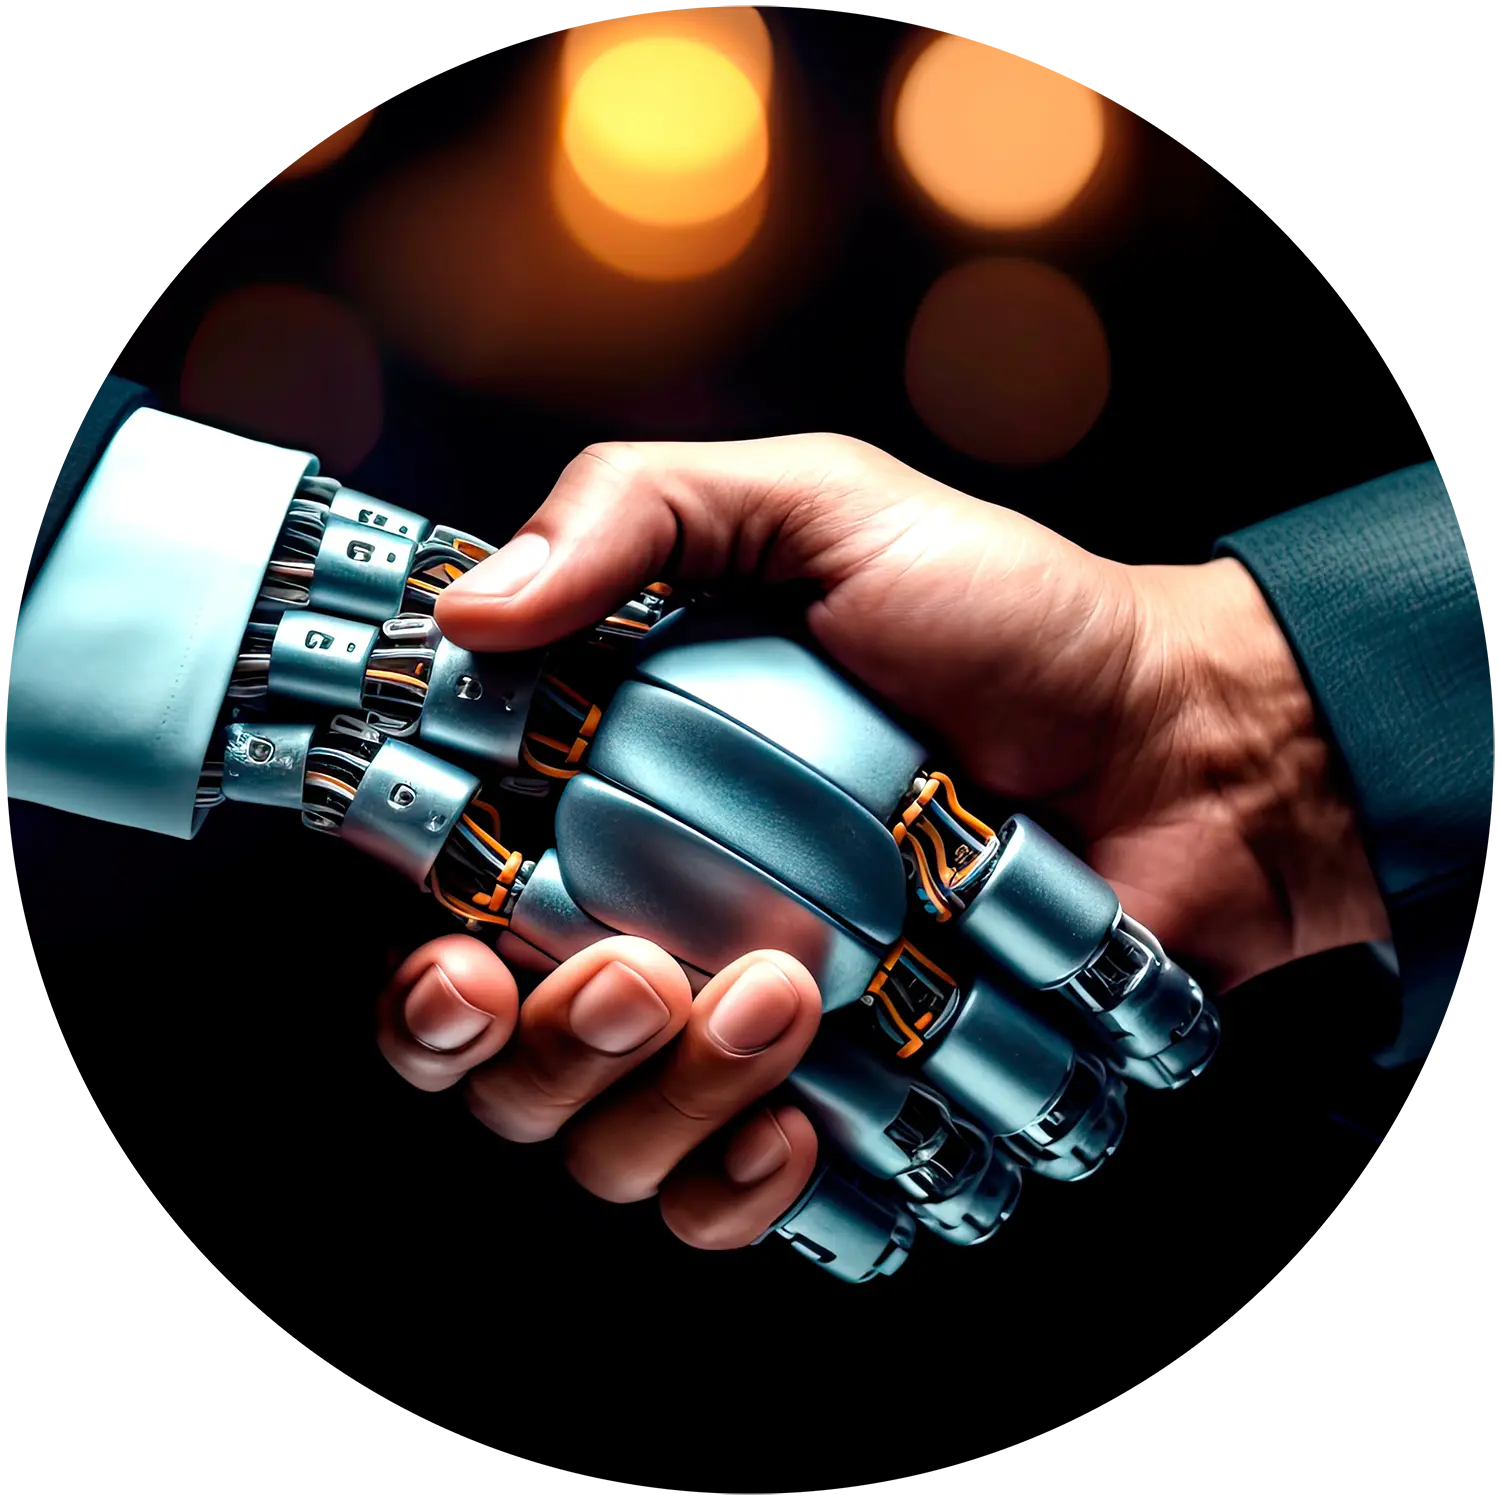 Human and AI Robot Shaking Hands as Allies